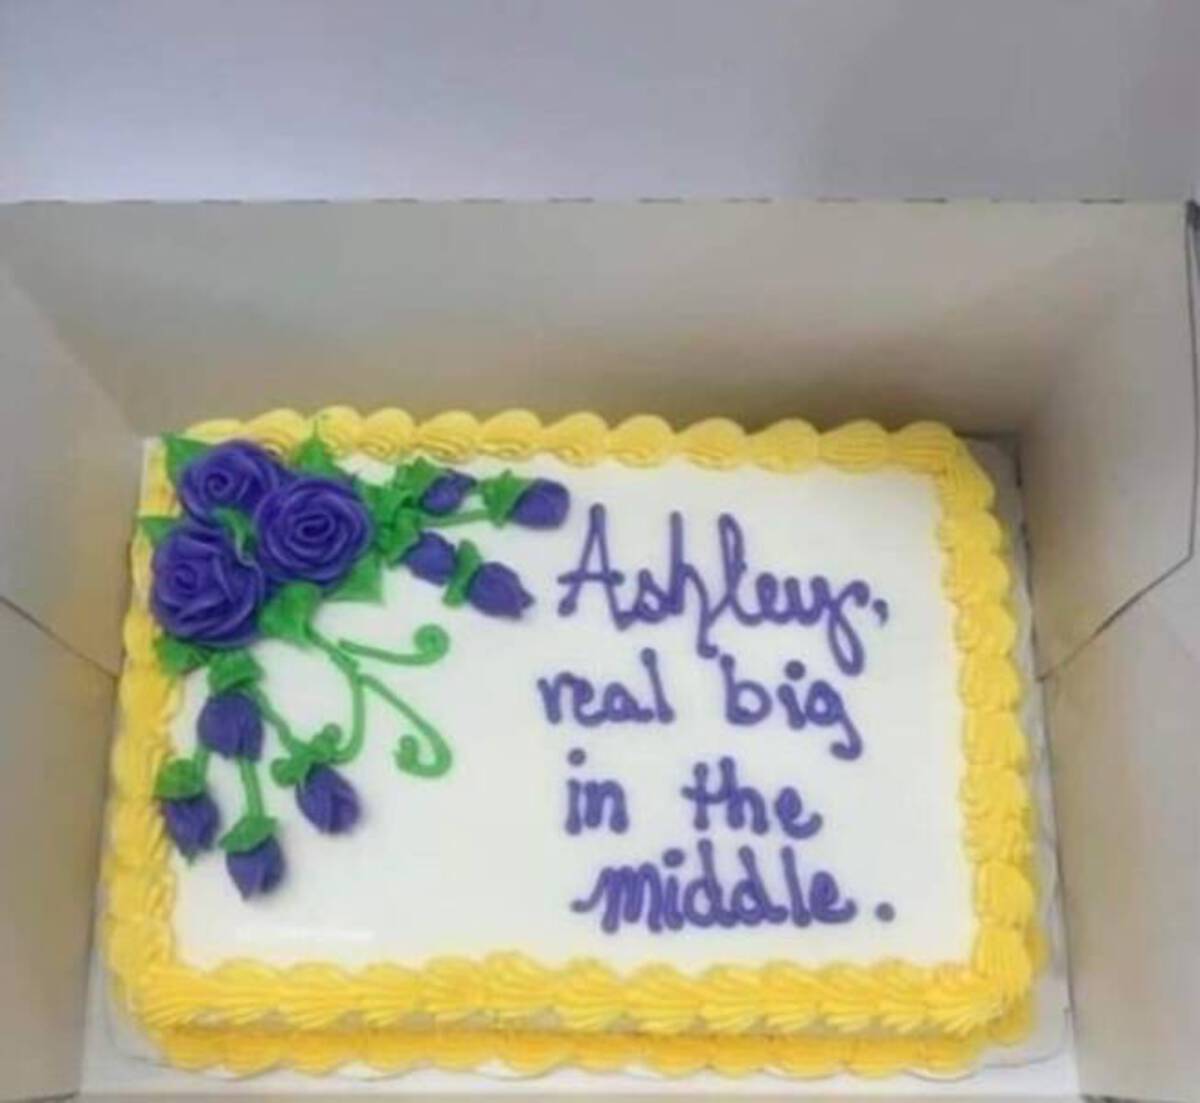 Cake - Ashley, real big in the middle.